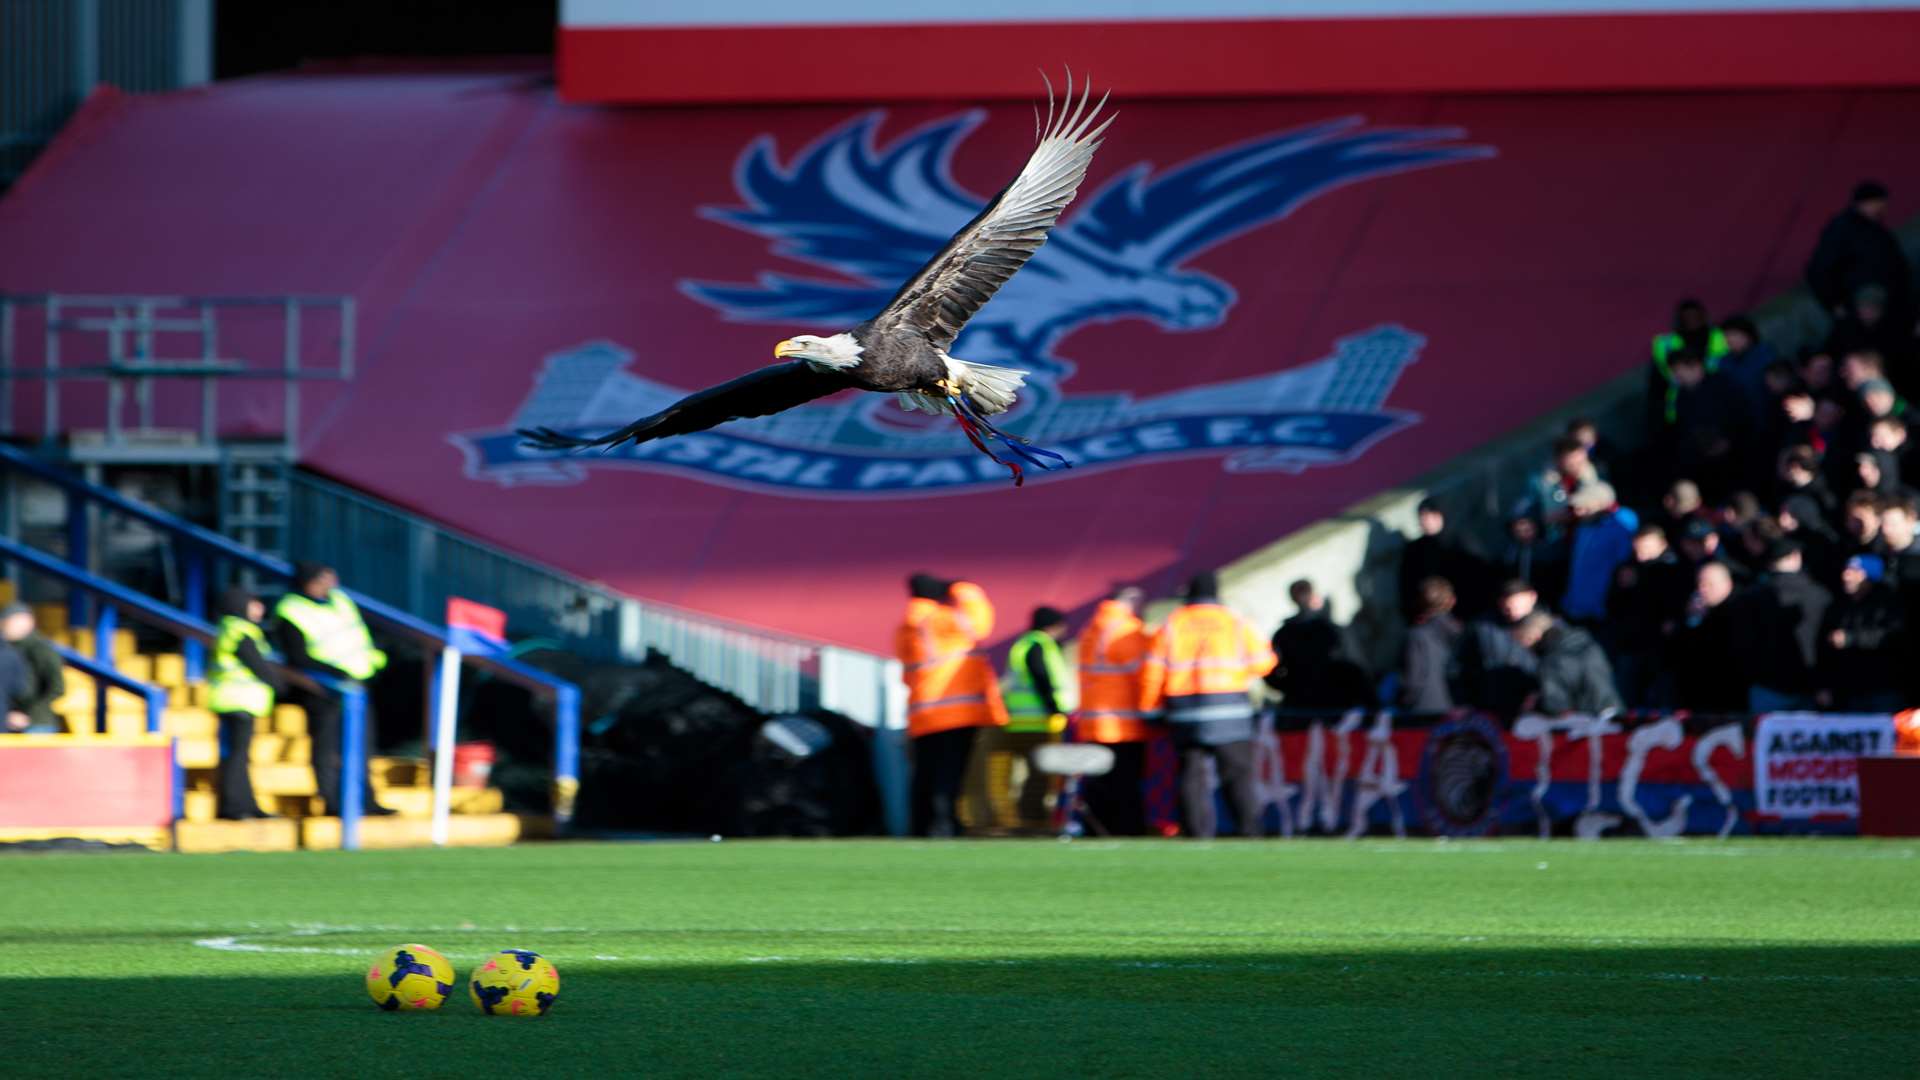 Kayla has made a big impression since swooping at Selhurst Park